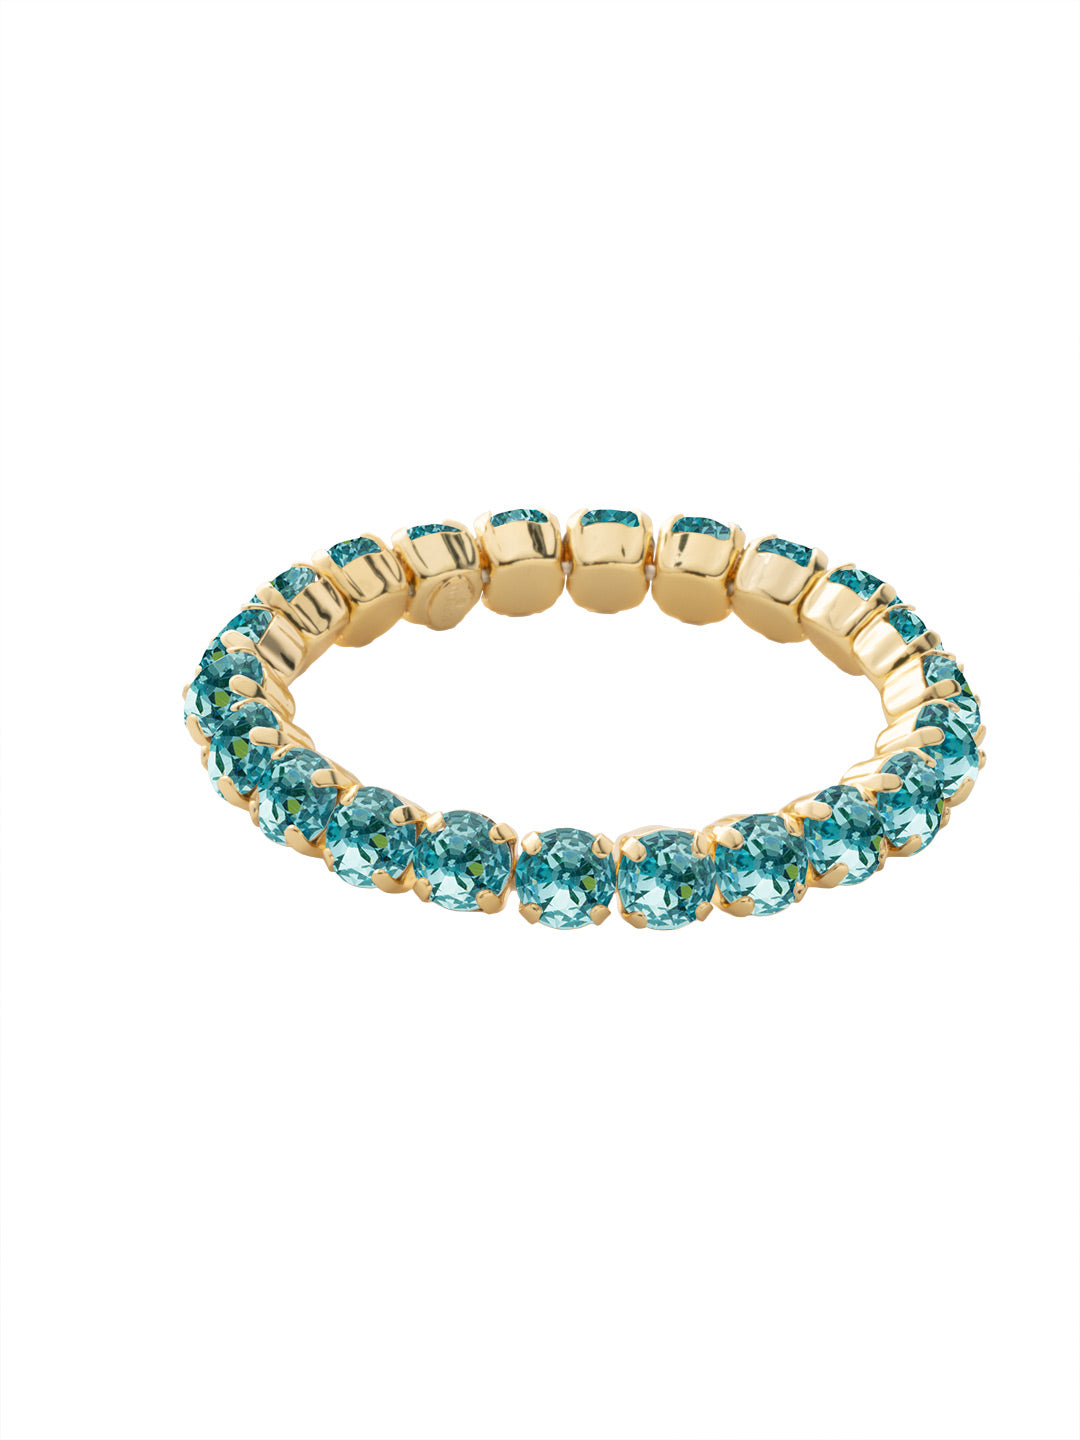 Sienna Stretch Bracelet - BFD50BGAQU - <p>A modern take on a classic style, the Sienna Stretch Bracelet features a line of crystals on a sturdy jewelers' filament, stretching to fit most wrists comfortably, without the hassle of a clasp! From Sorrelli's Aquamarine collection in our Bright Gold-tone finish.</p>